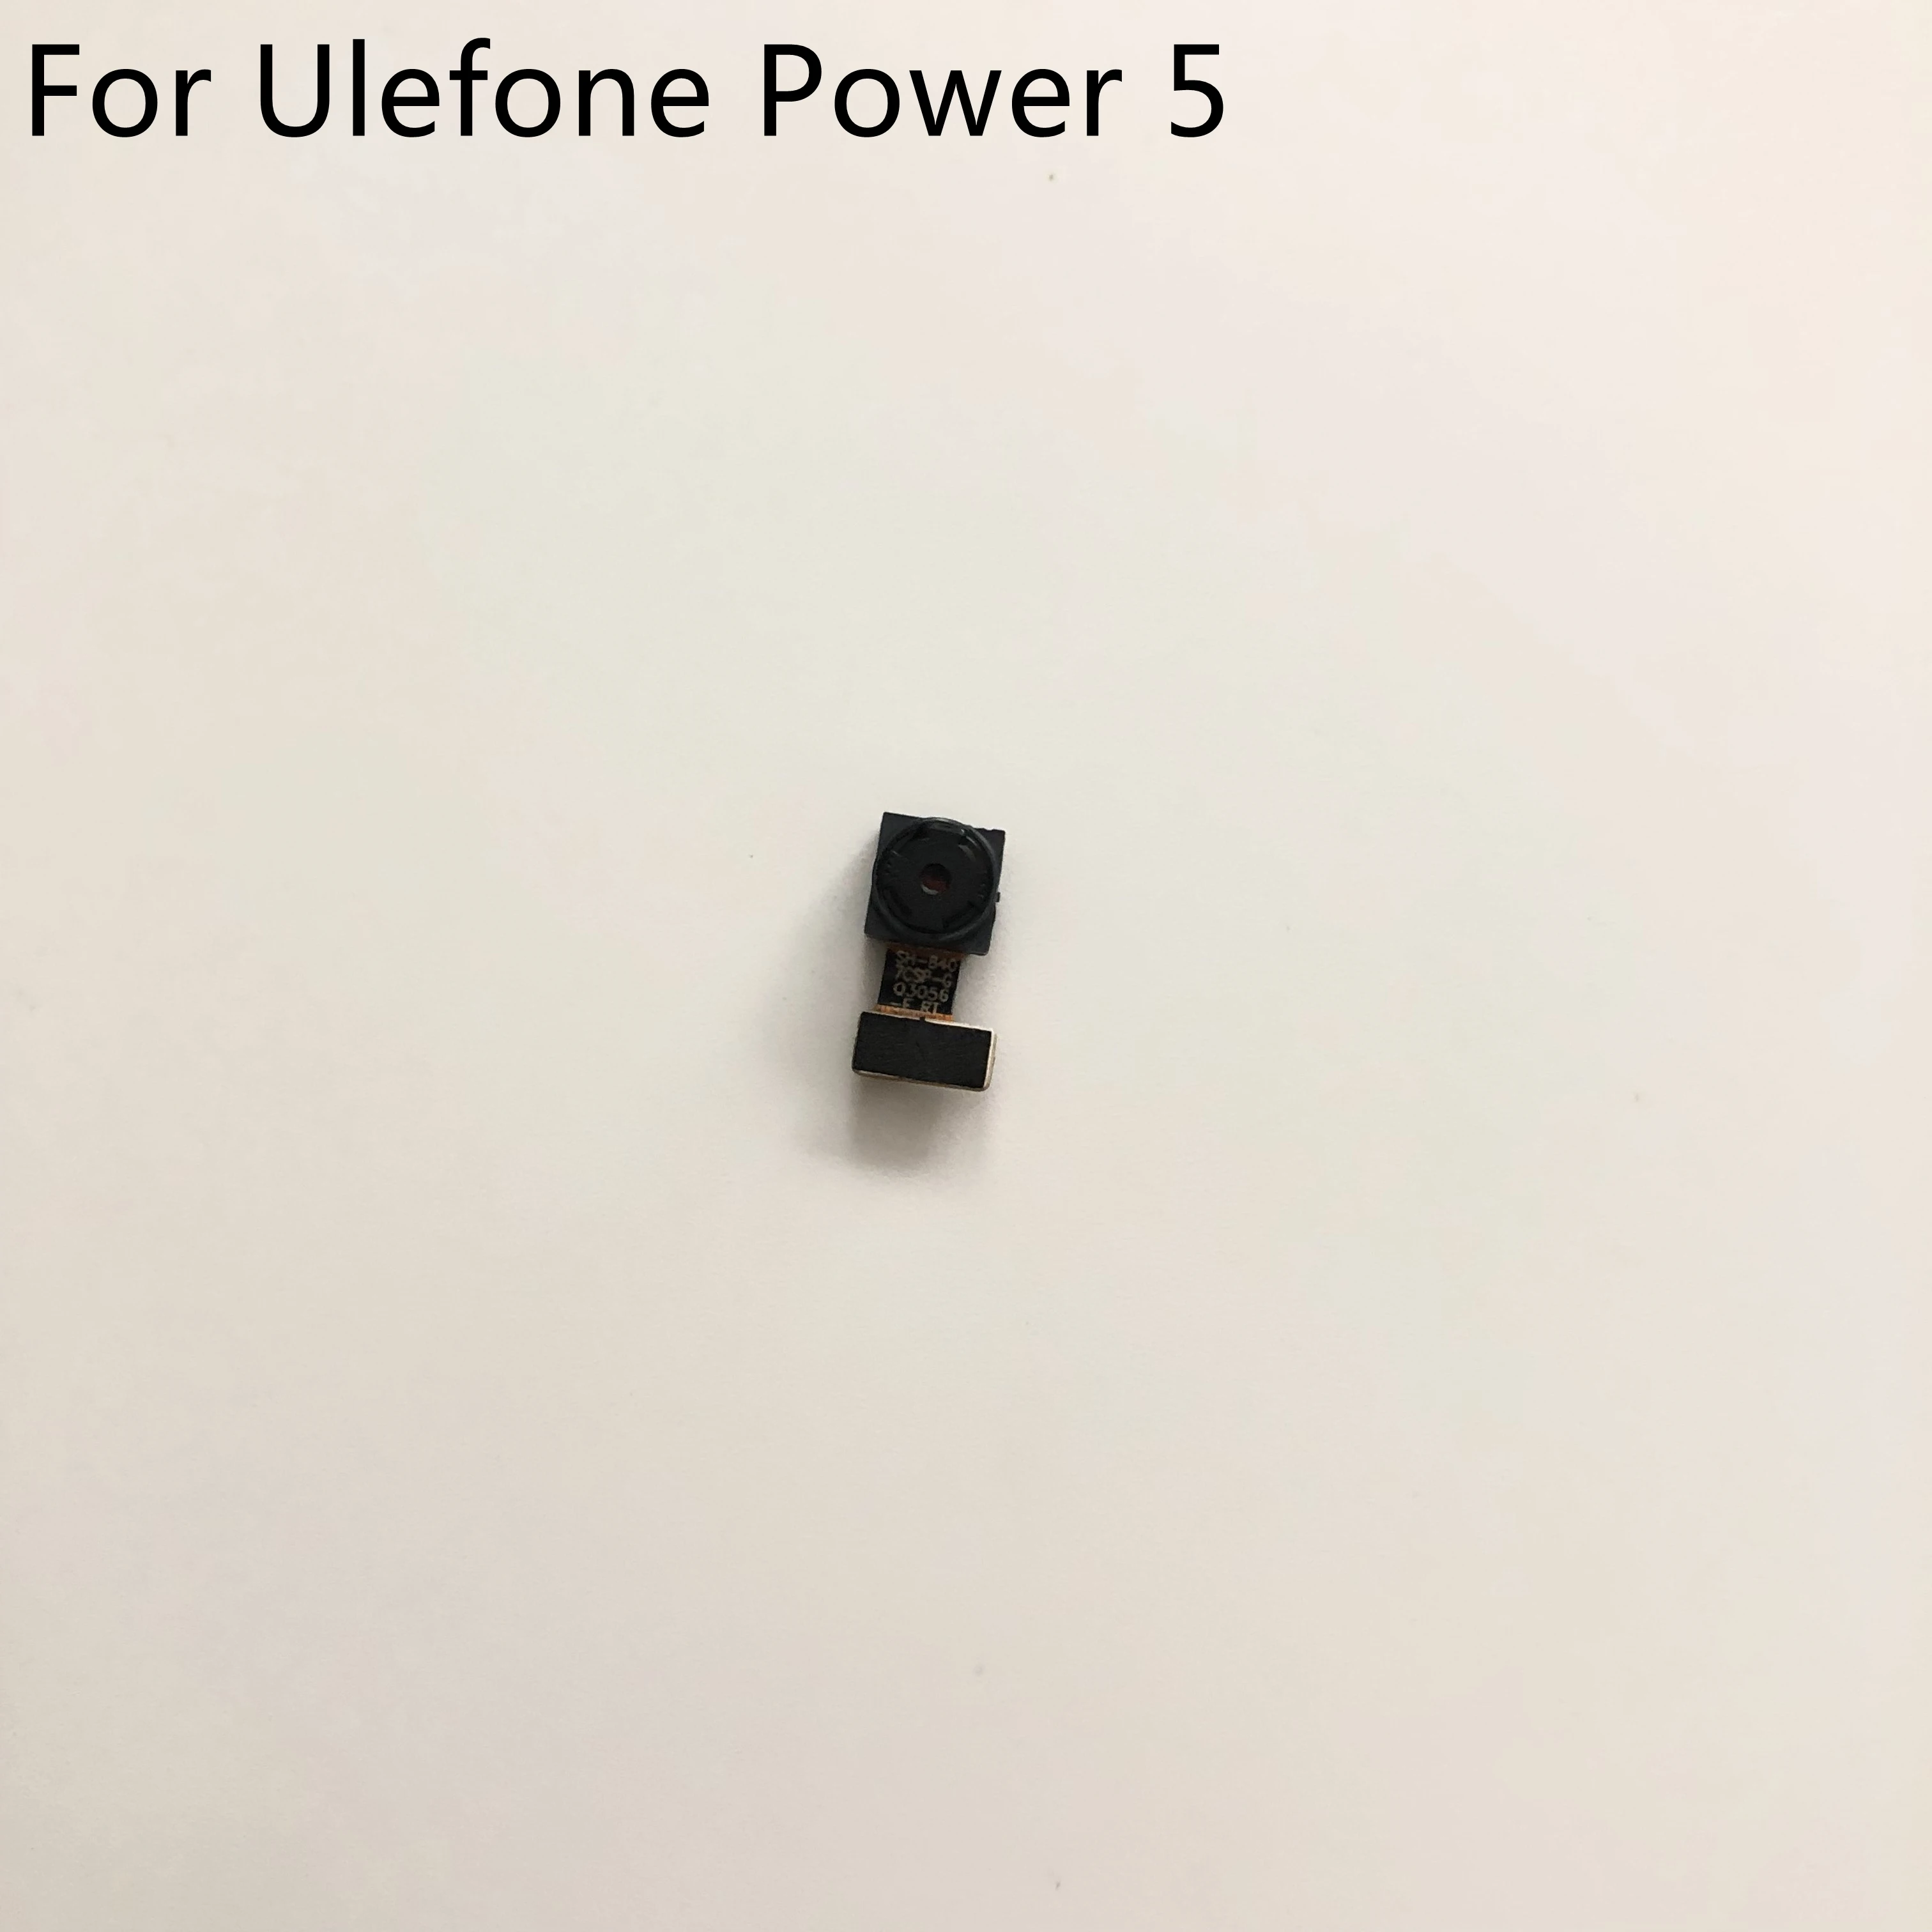 

Used Front Camera 8.0MP Module For Ulefone Power 5 MTK6763 Octa Core 6.0" FHD 2160x1080 4G Smartphone